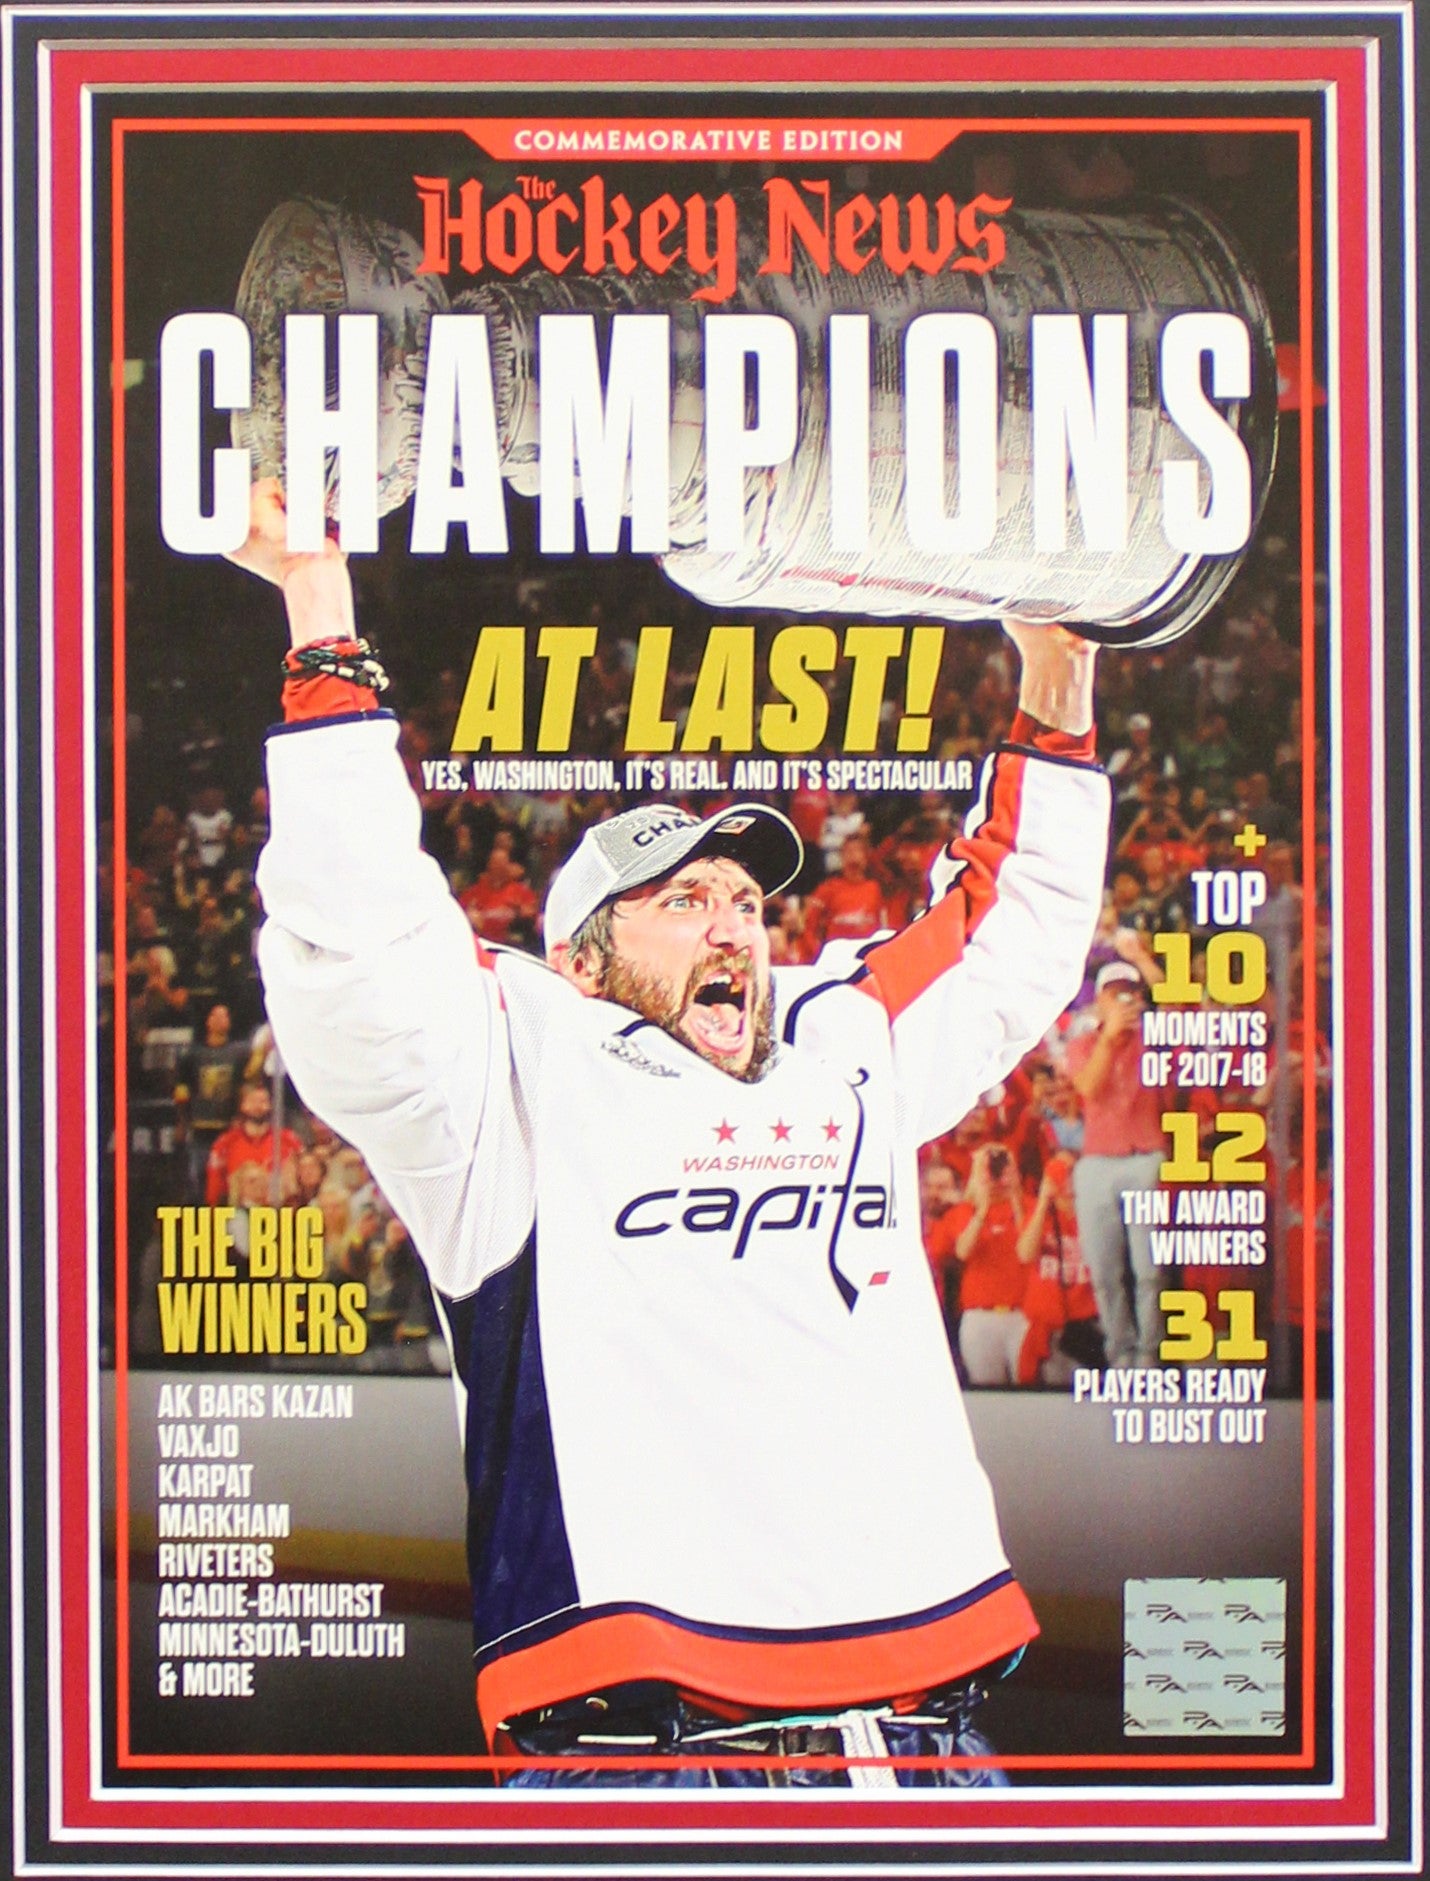 2018 Stanley Cup Champion (DVD) for sale online